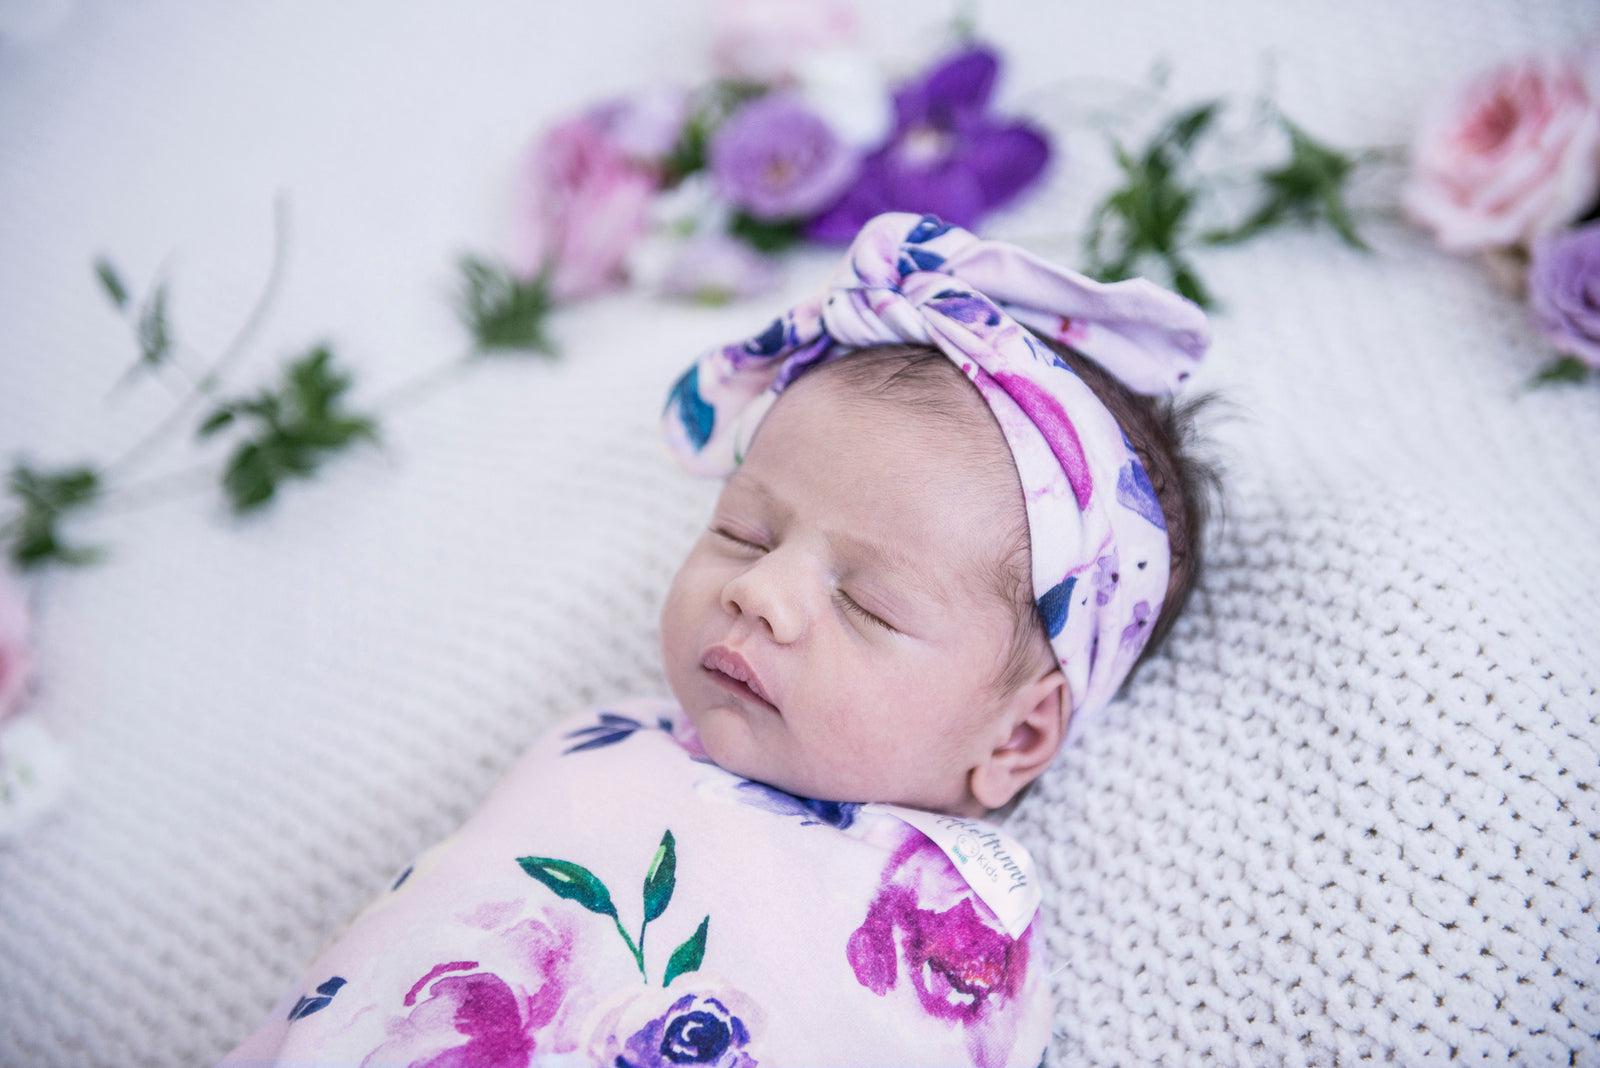 Floral Kiss Snuggle Swaddle and Topknot Set-Snuggle Hunny Kids-Baby store NZ Flourish Maternity